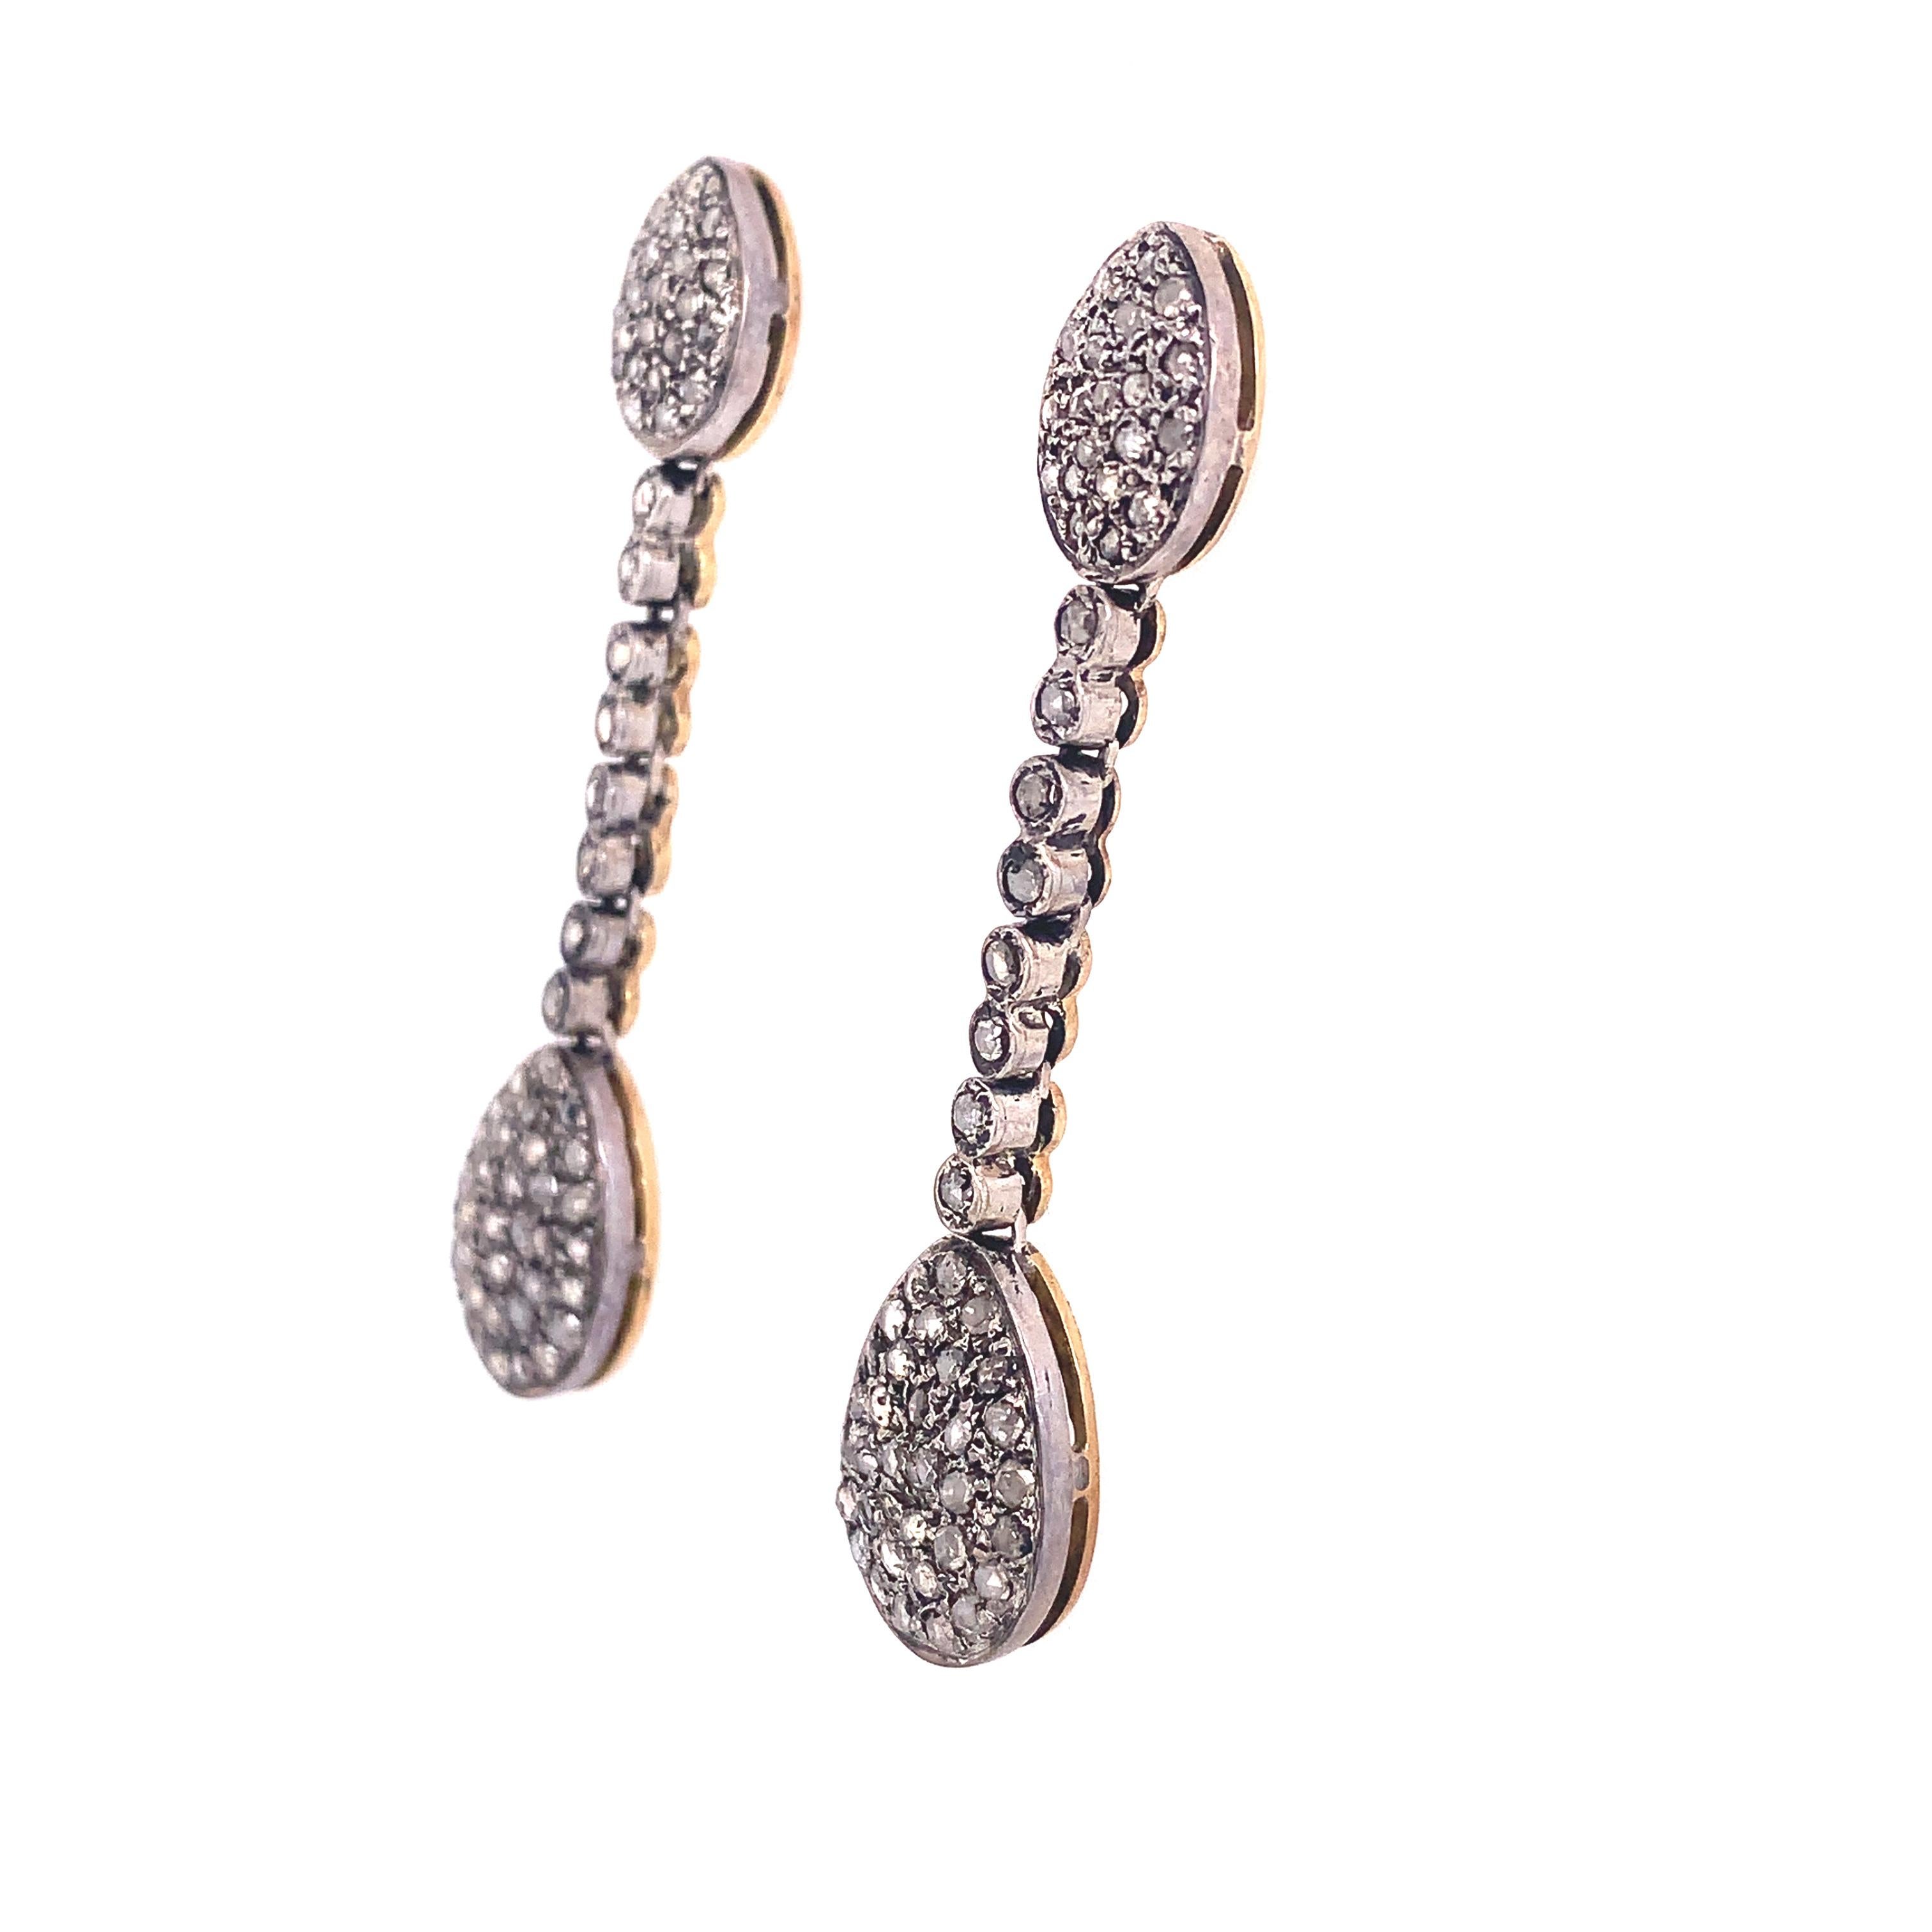 Rustic collection

Rustic Diamonds drop earring set in blackened sterling silver and yellow gold.

Diamond : 1.29ct total weight.
